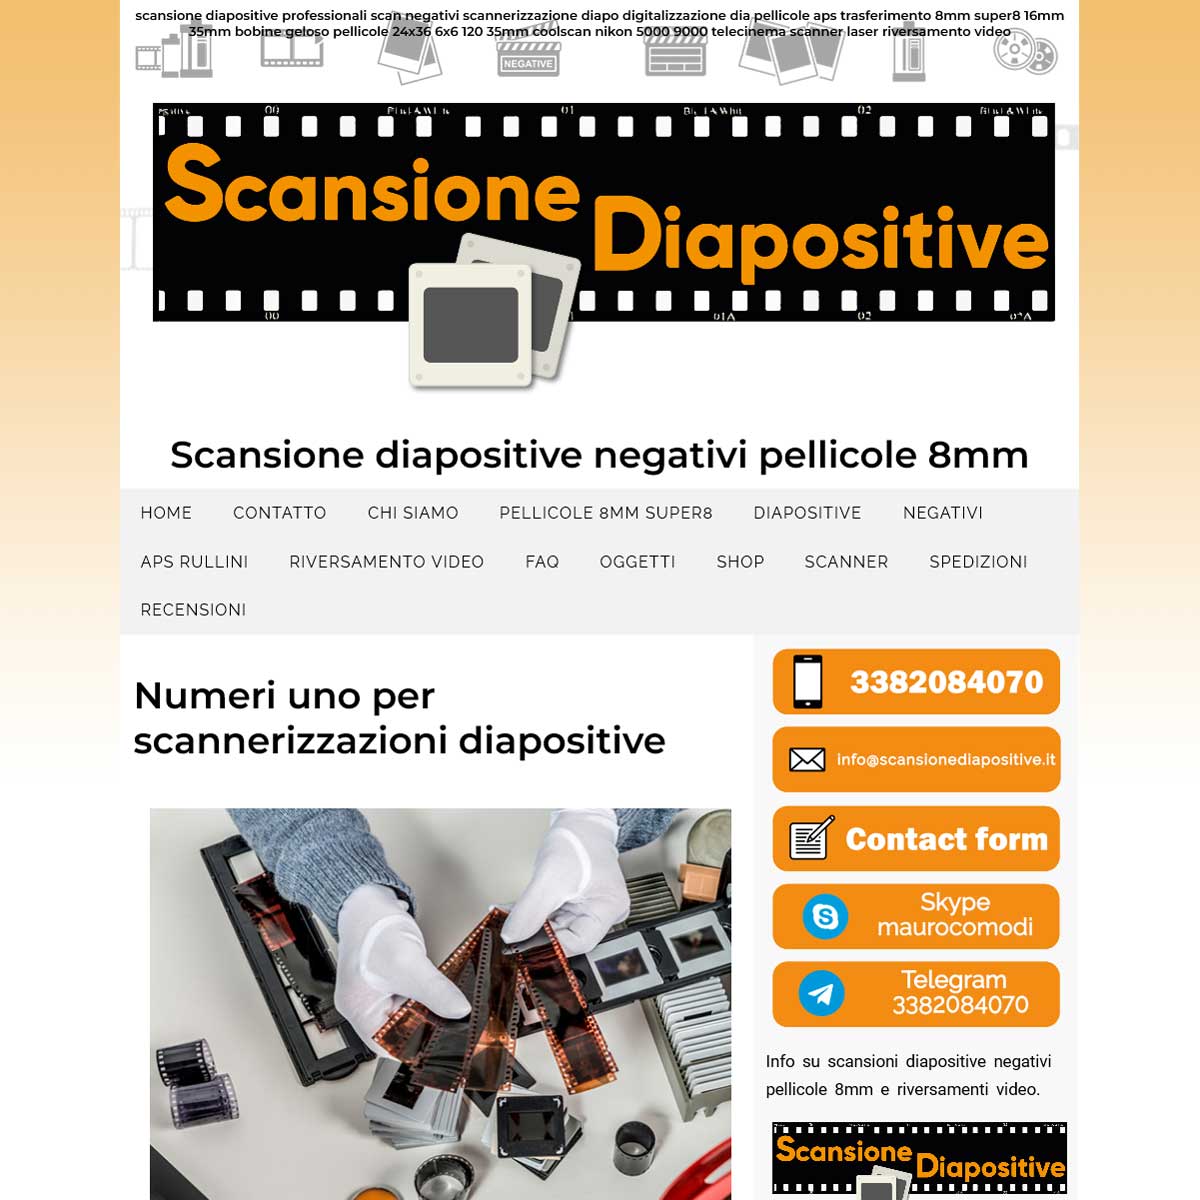 Scansione diapositive